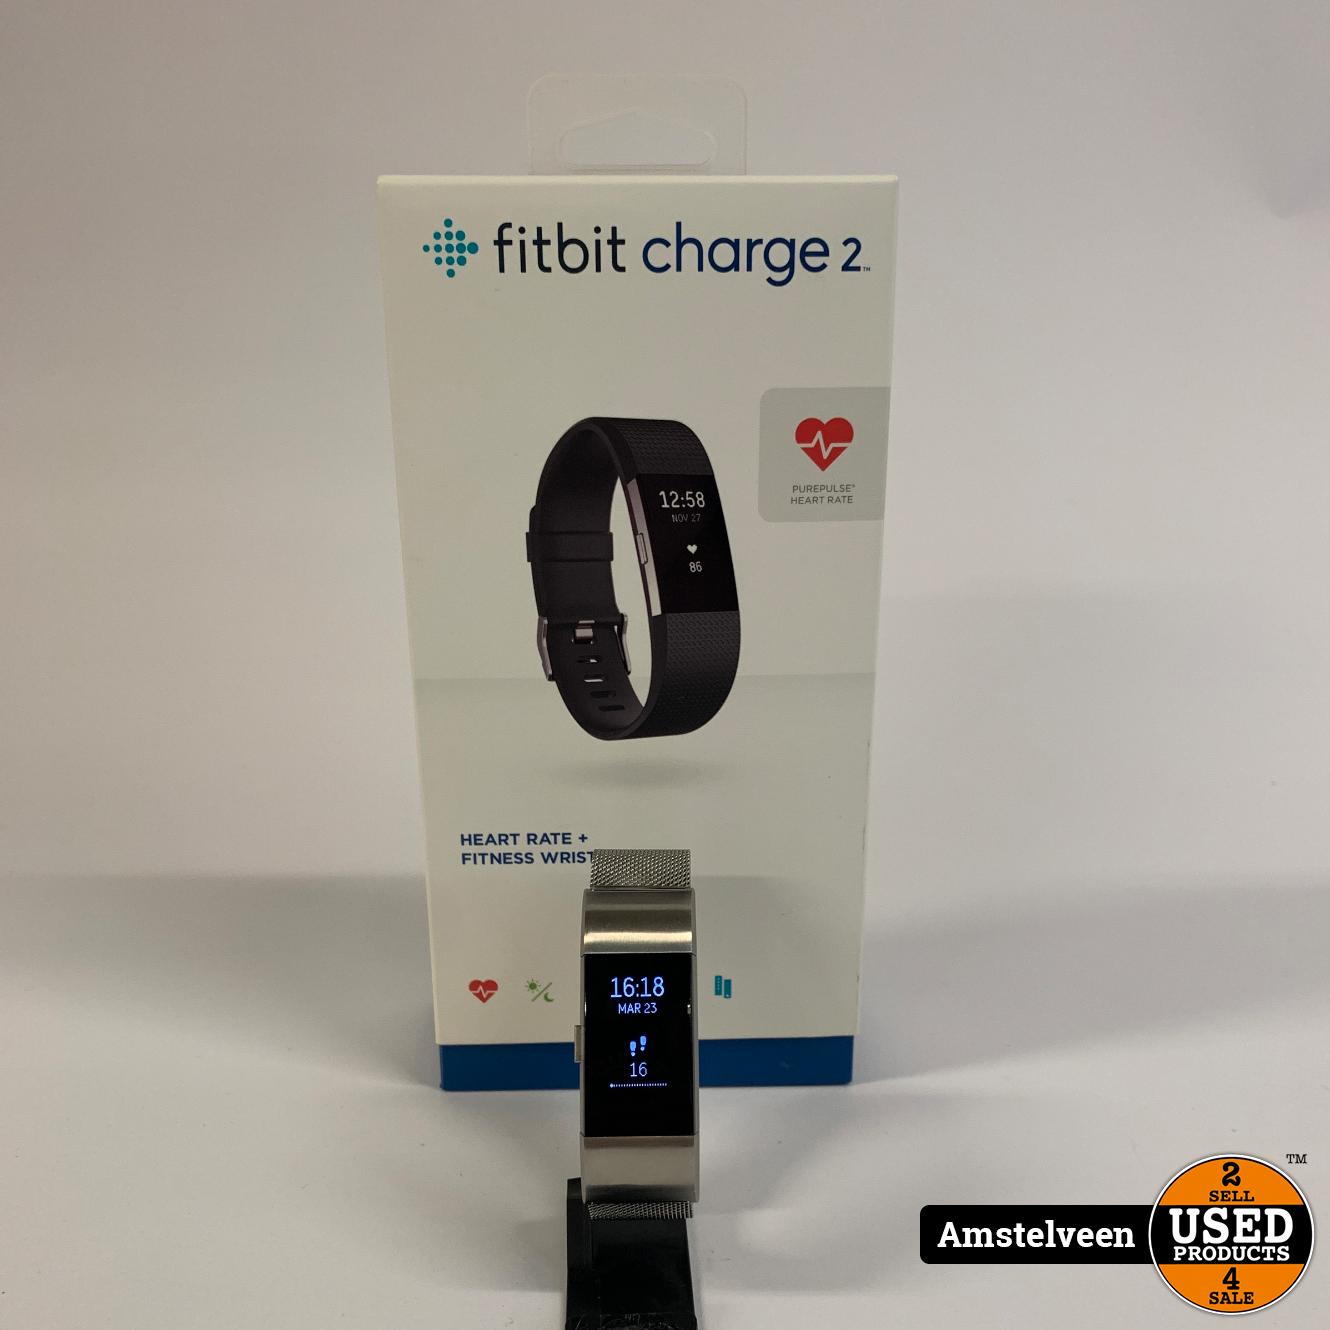 Fitbit Charge 2 | Nette - Used Products Amstelveen